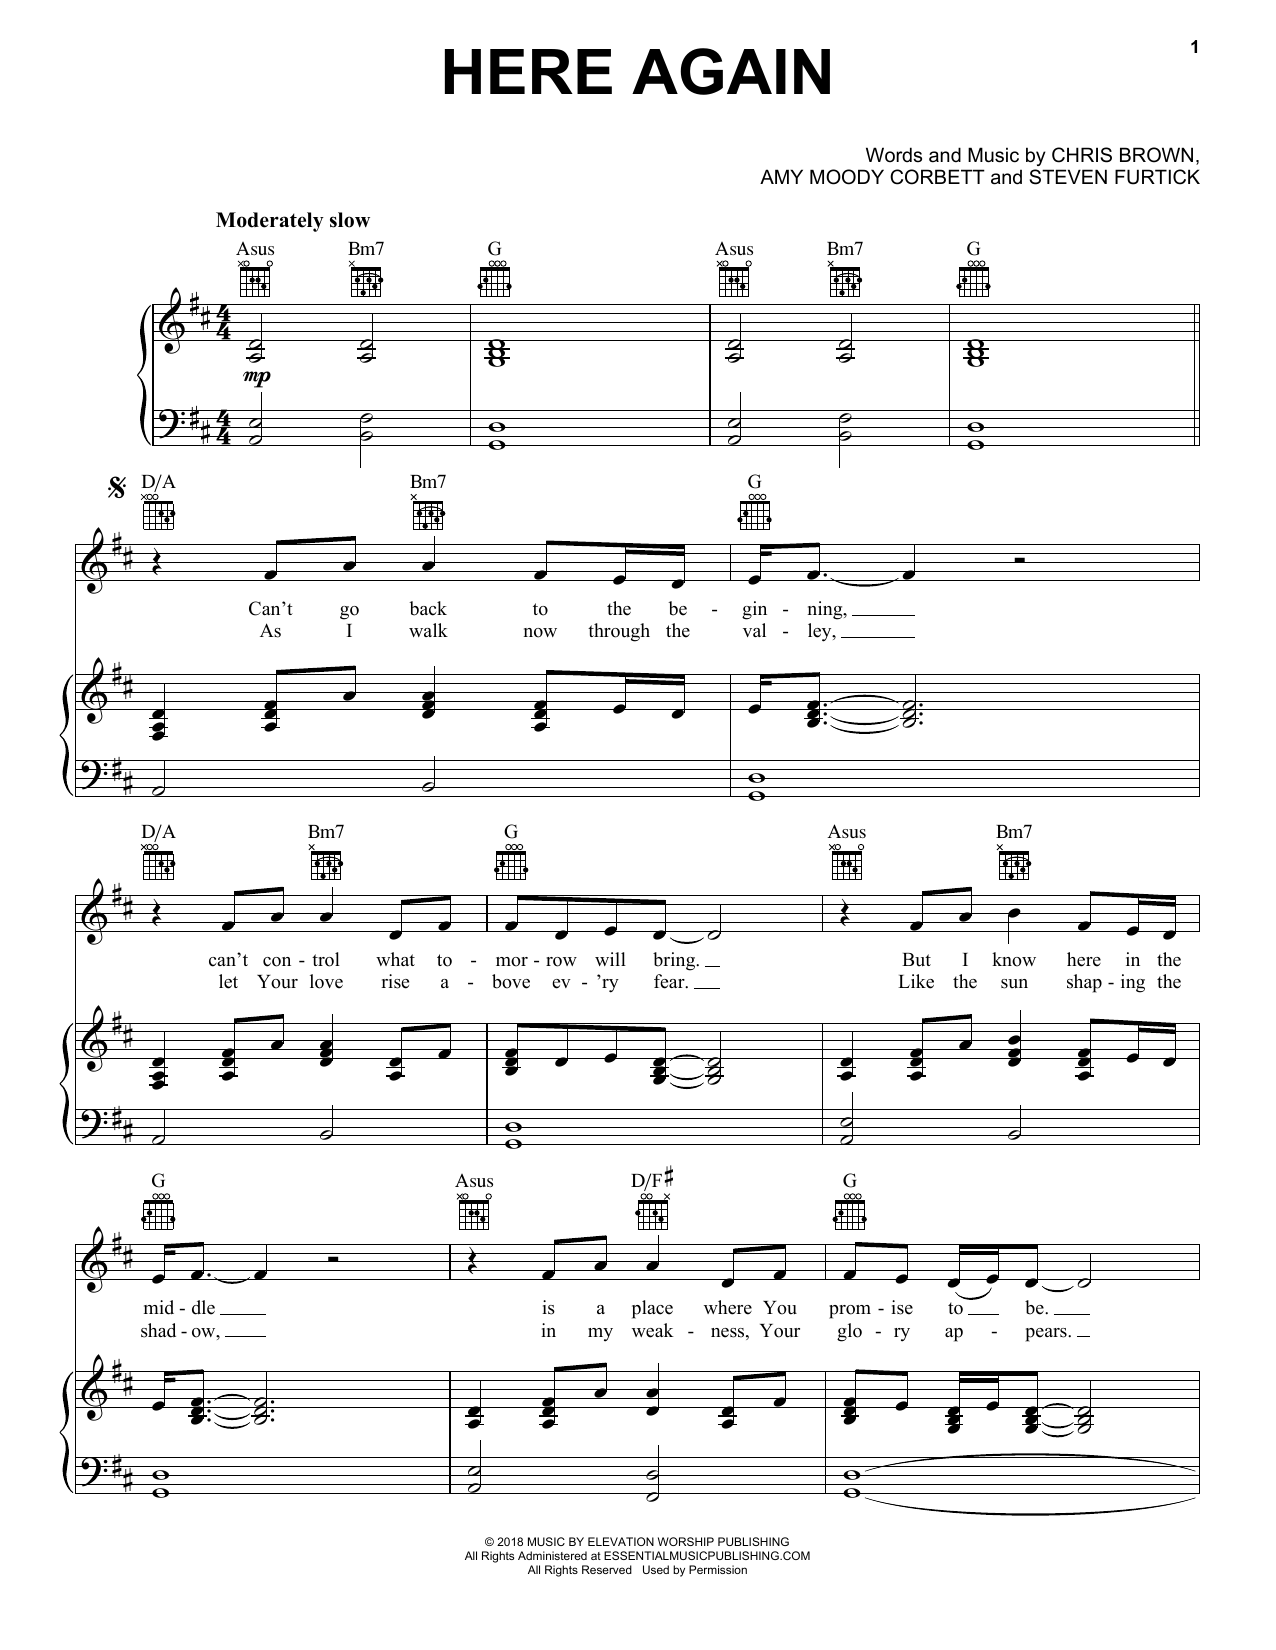 Download Elevation Worship Here Again Sheet Music